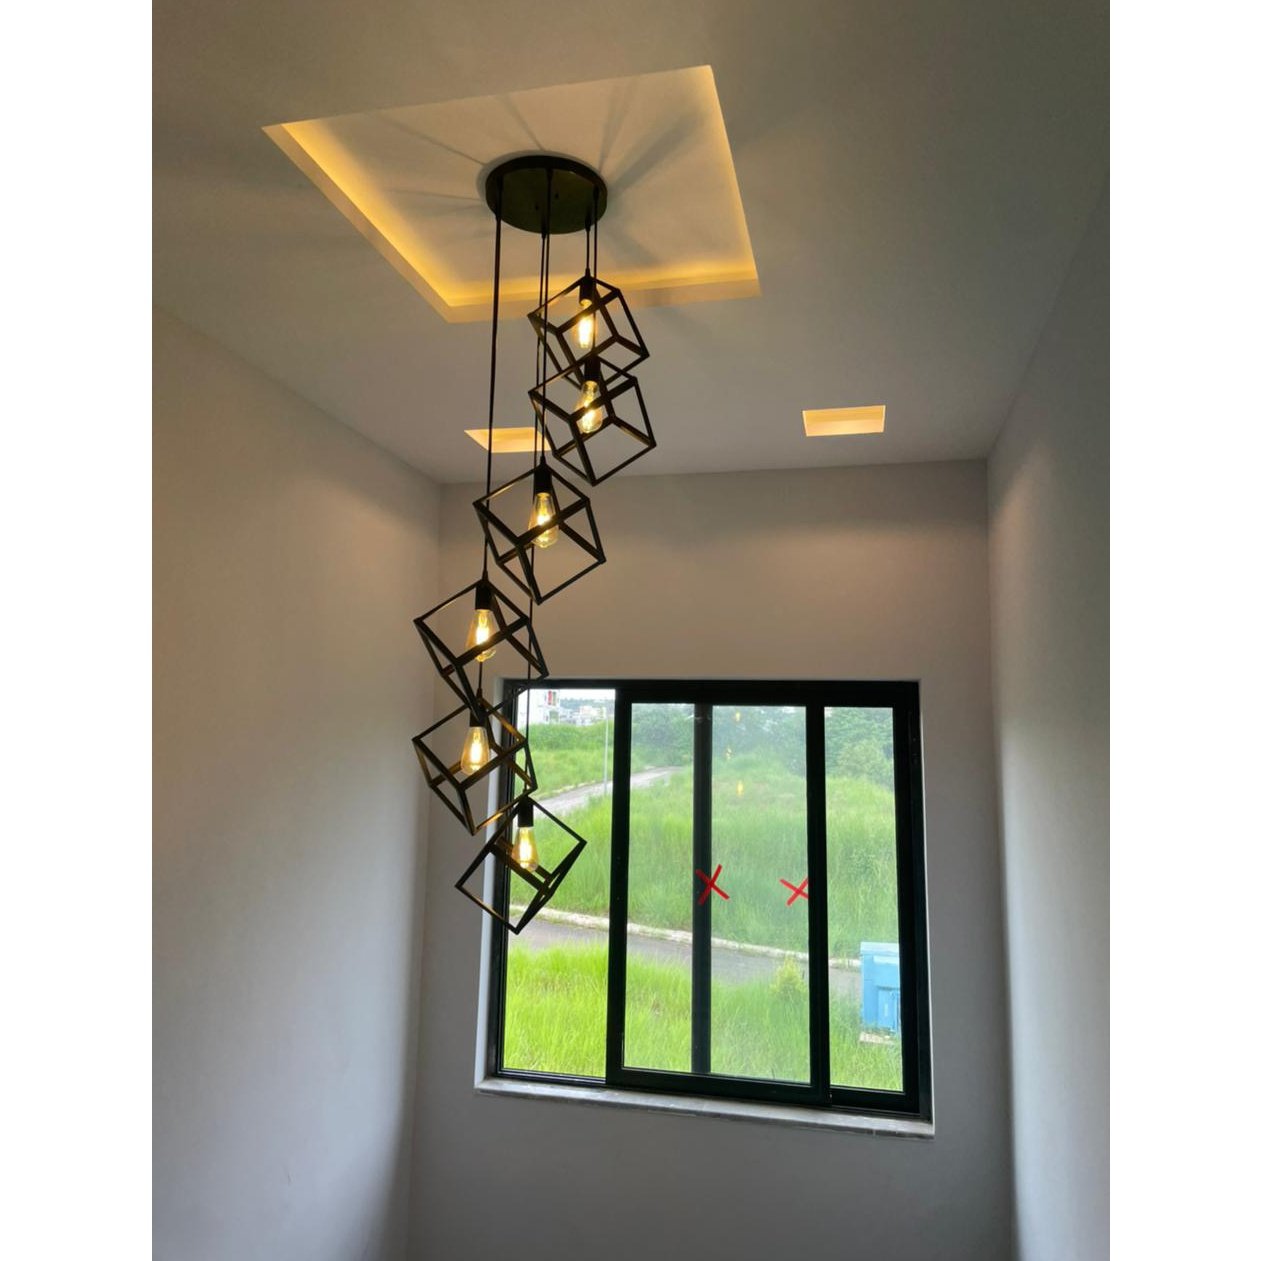 Buy Set of Six Metal Cube Hanging Lights with Round Base online on Doorpey.com. Explore our wide range of hanging lights, wall mounted lights, ceiling lights, pendant lights and many other lights for home and office use.